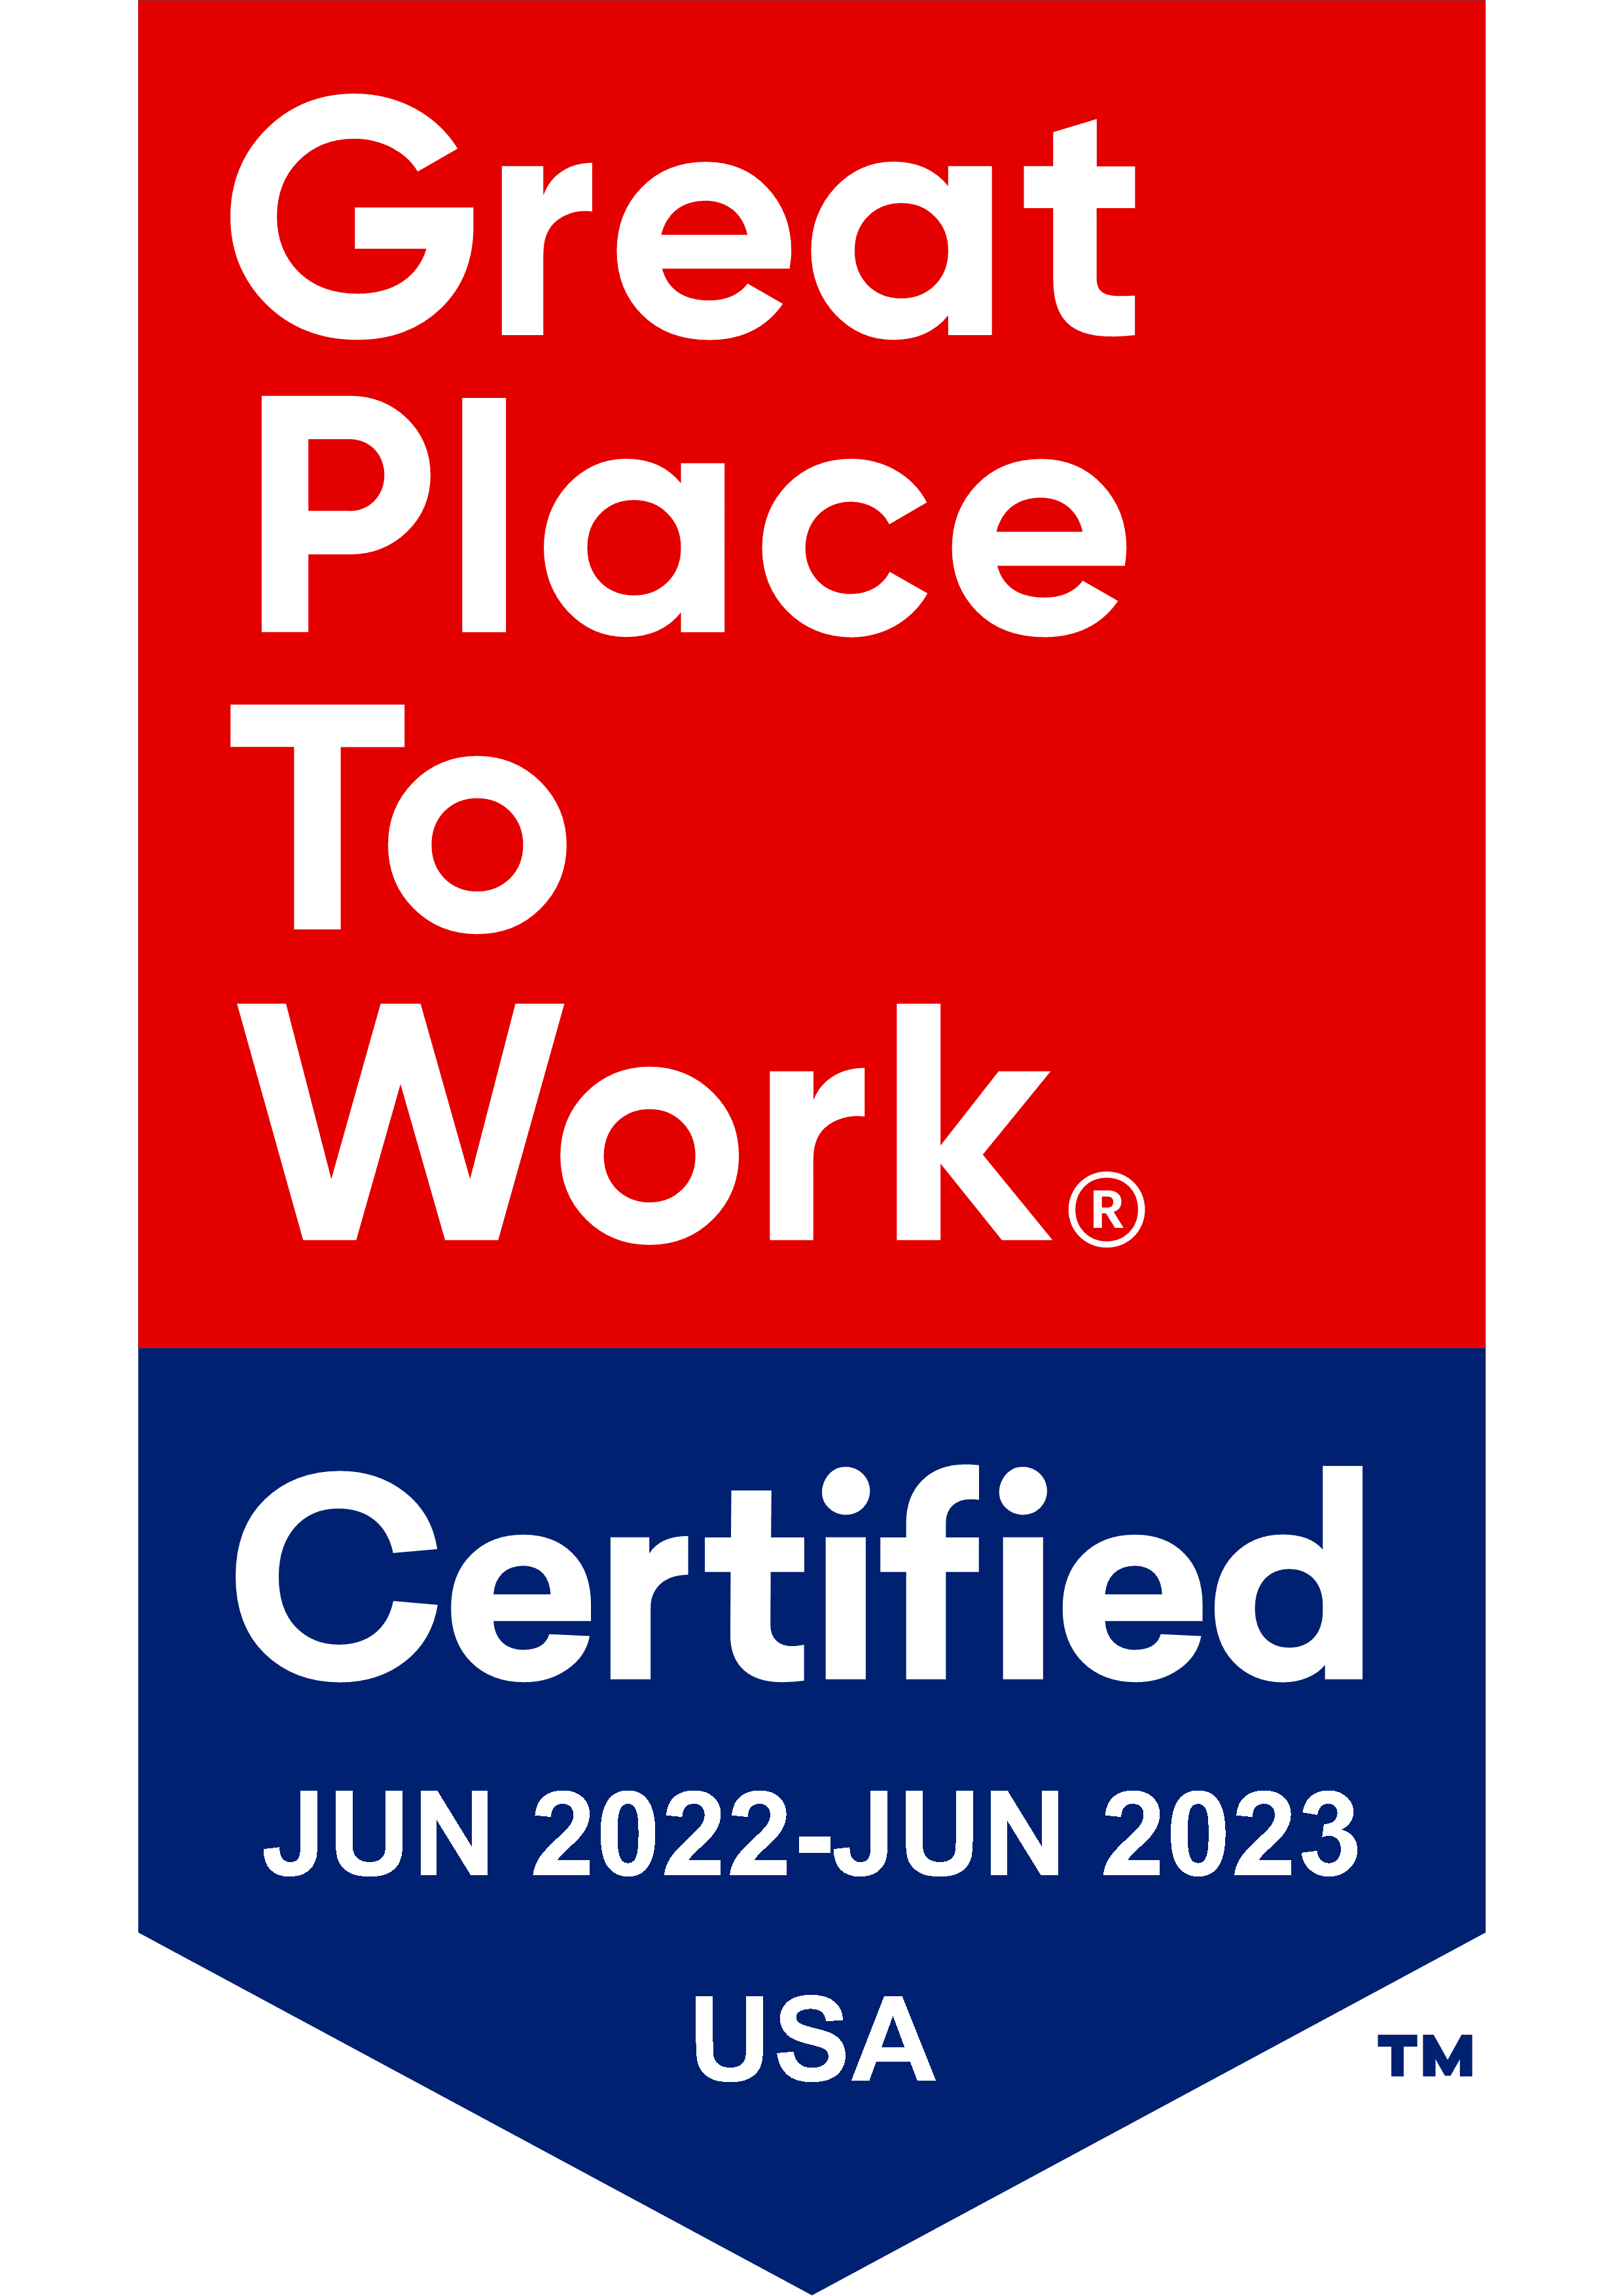 ACG Achieved Great Place to Work for 2022!